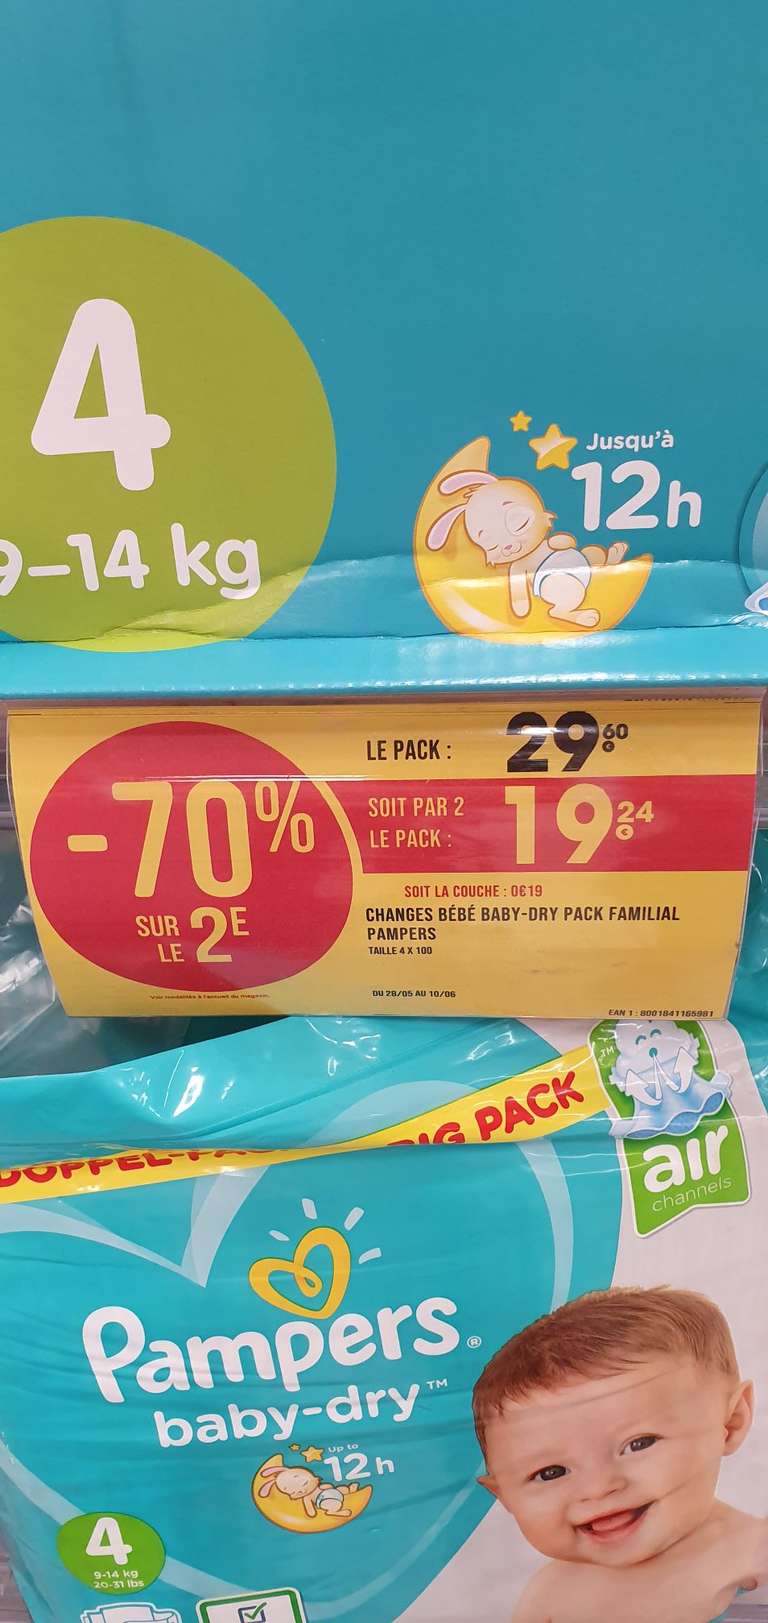 2 Paquets de 100 Couches Pampers Baby Dry - Massena (75)